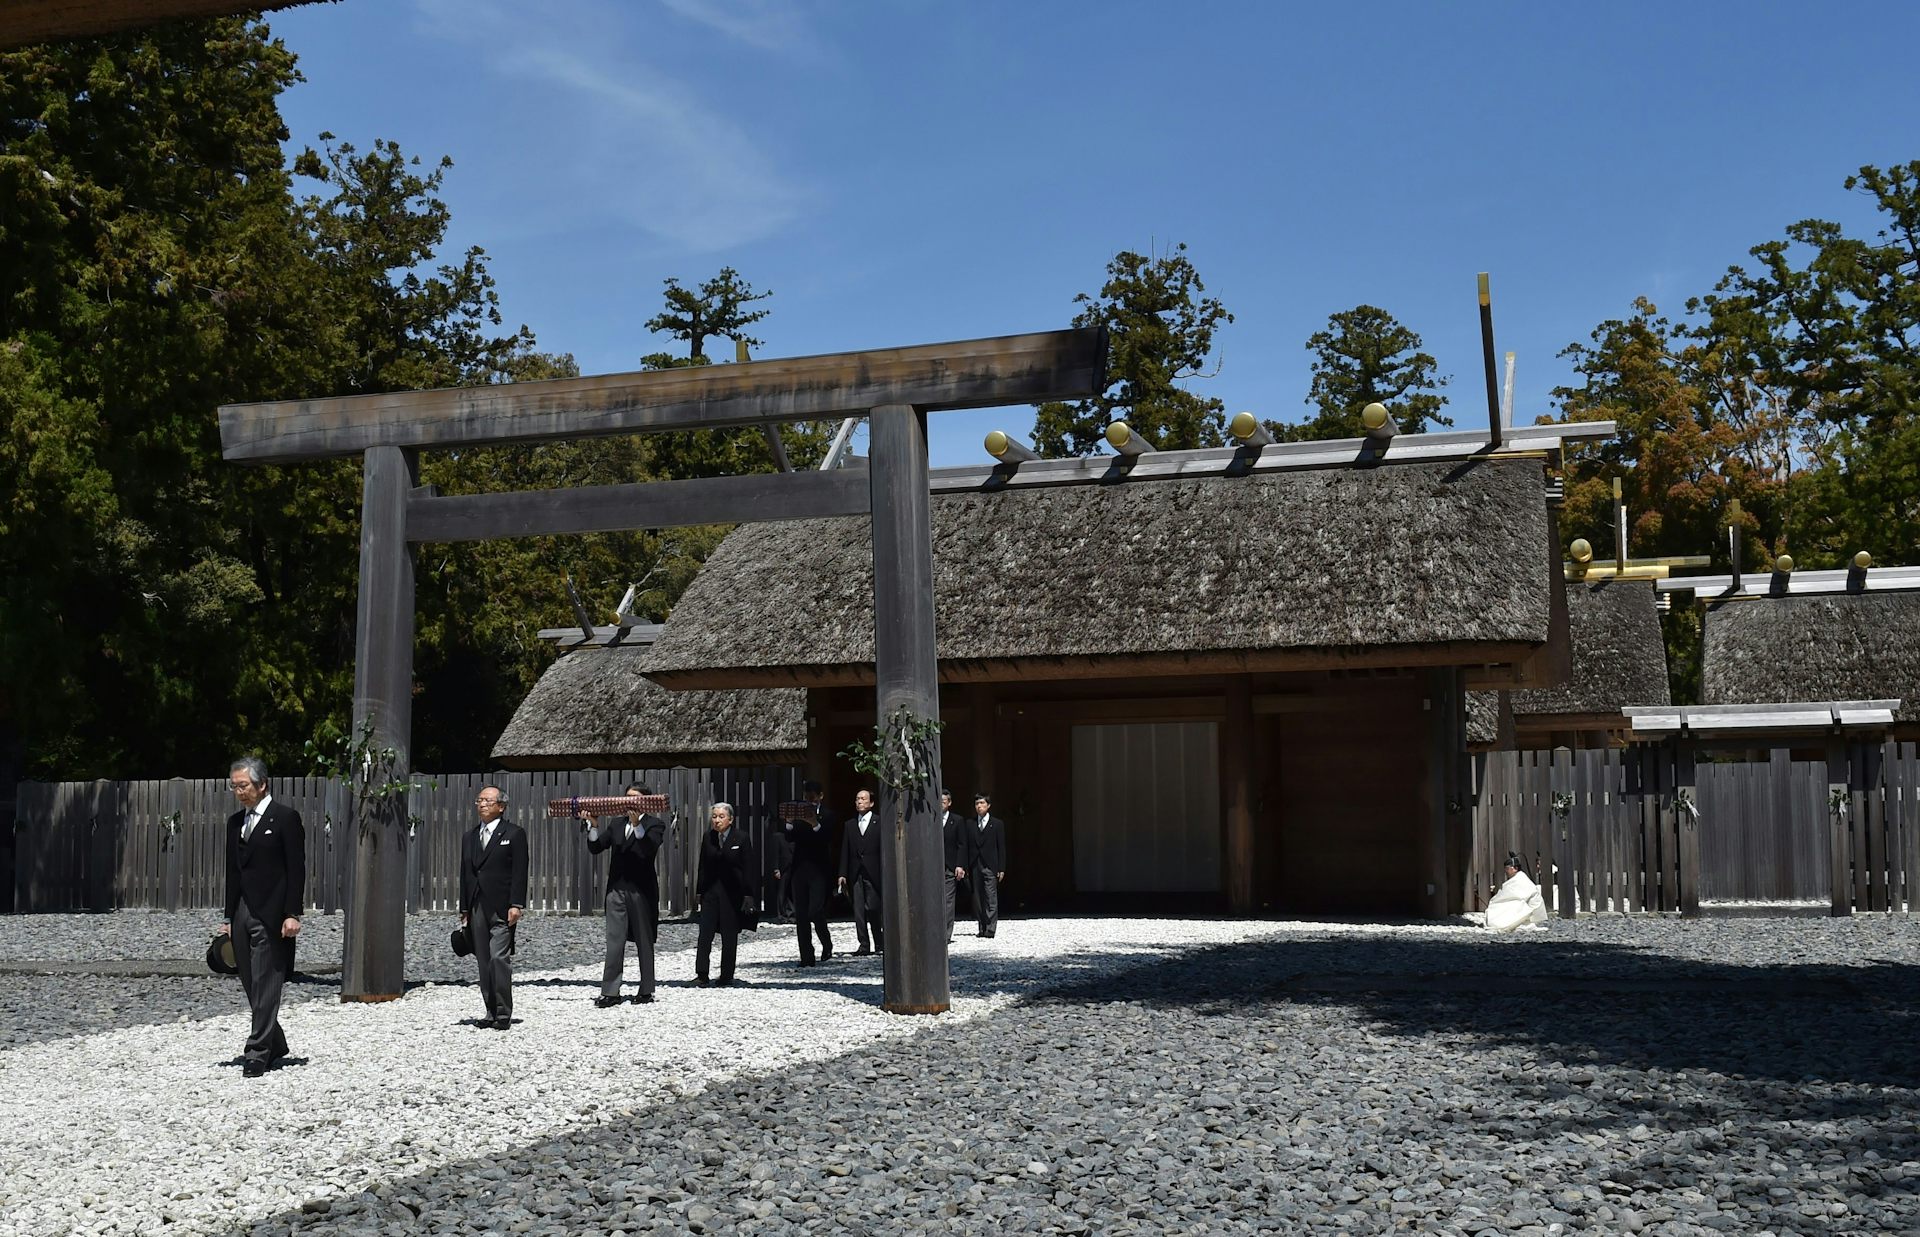 Shinto religion has long been entangled with Japan's politics 